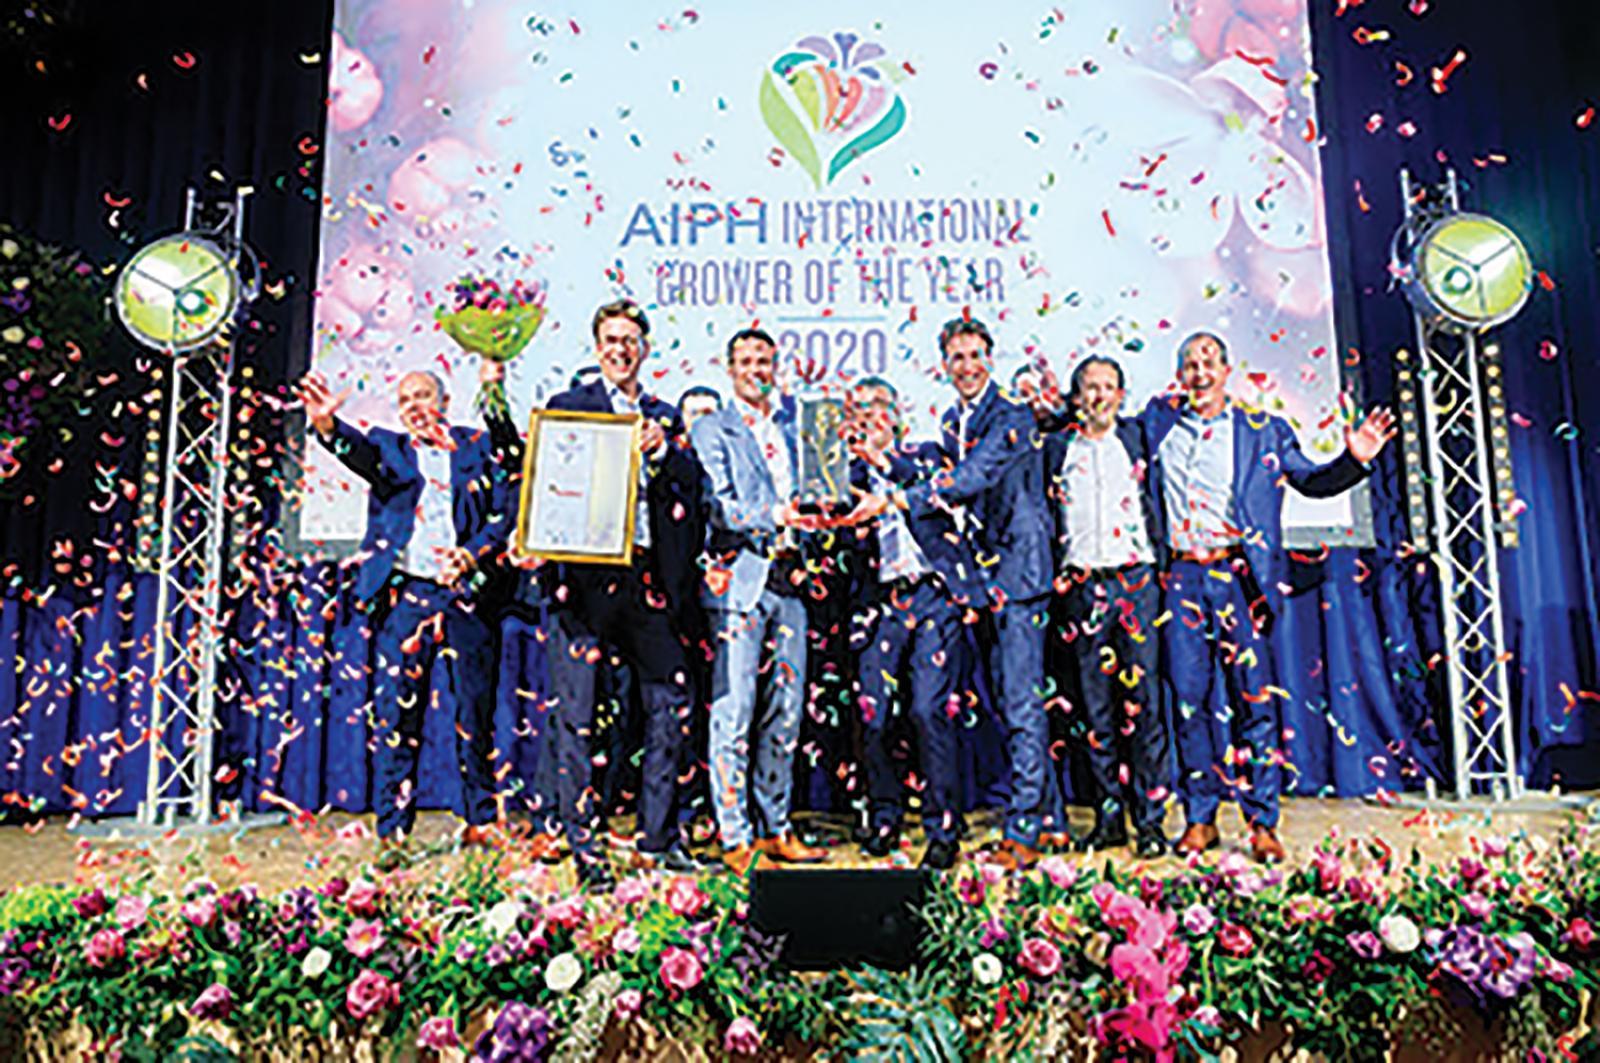 The 2020 AIPH International Grower of the Year Award  was won by Anthura.